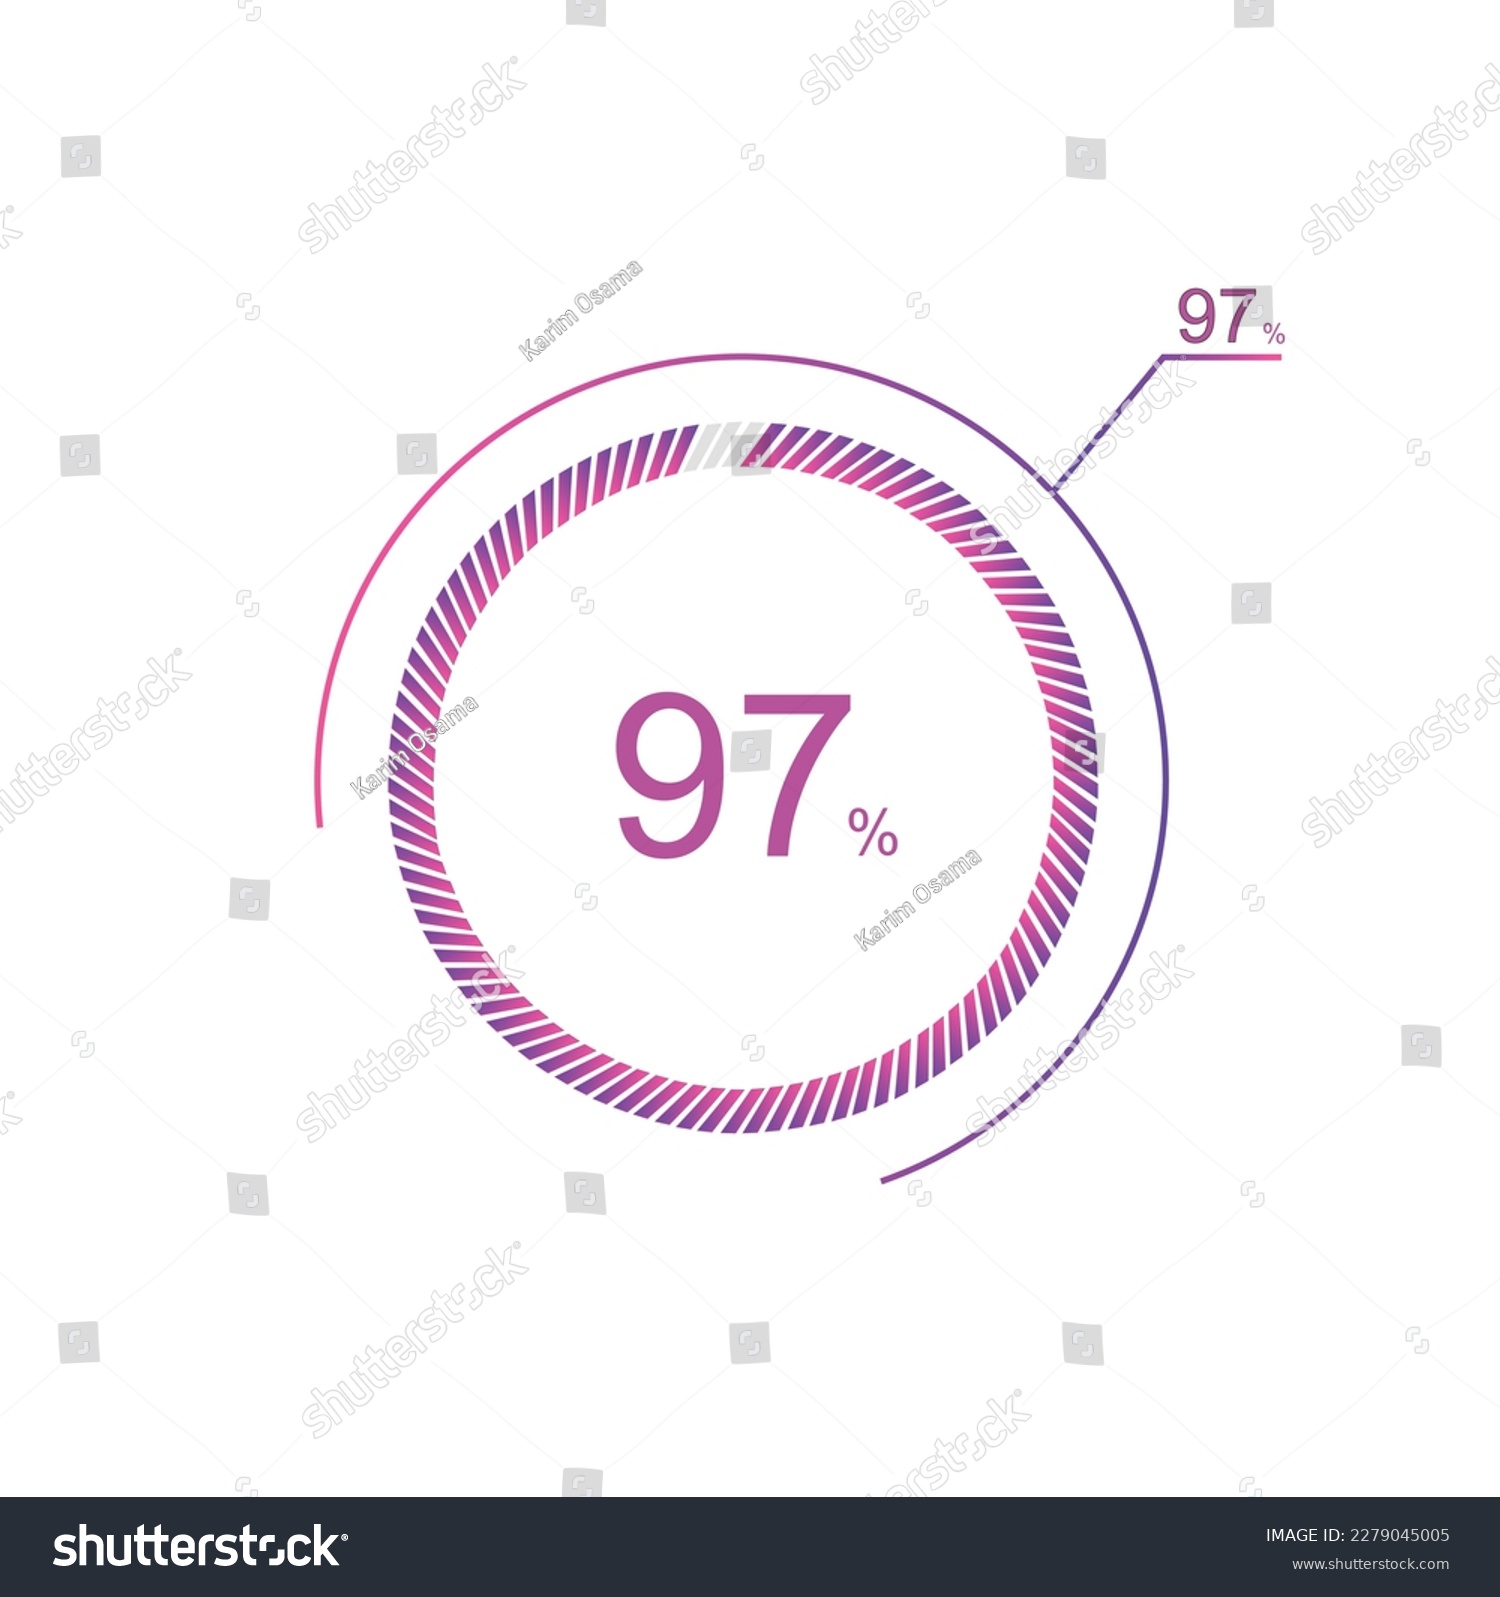 SVG of 97% percent circle chart symbol. 97 percentage Icons for business, finance, report, downloading. svg